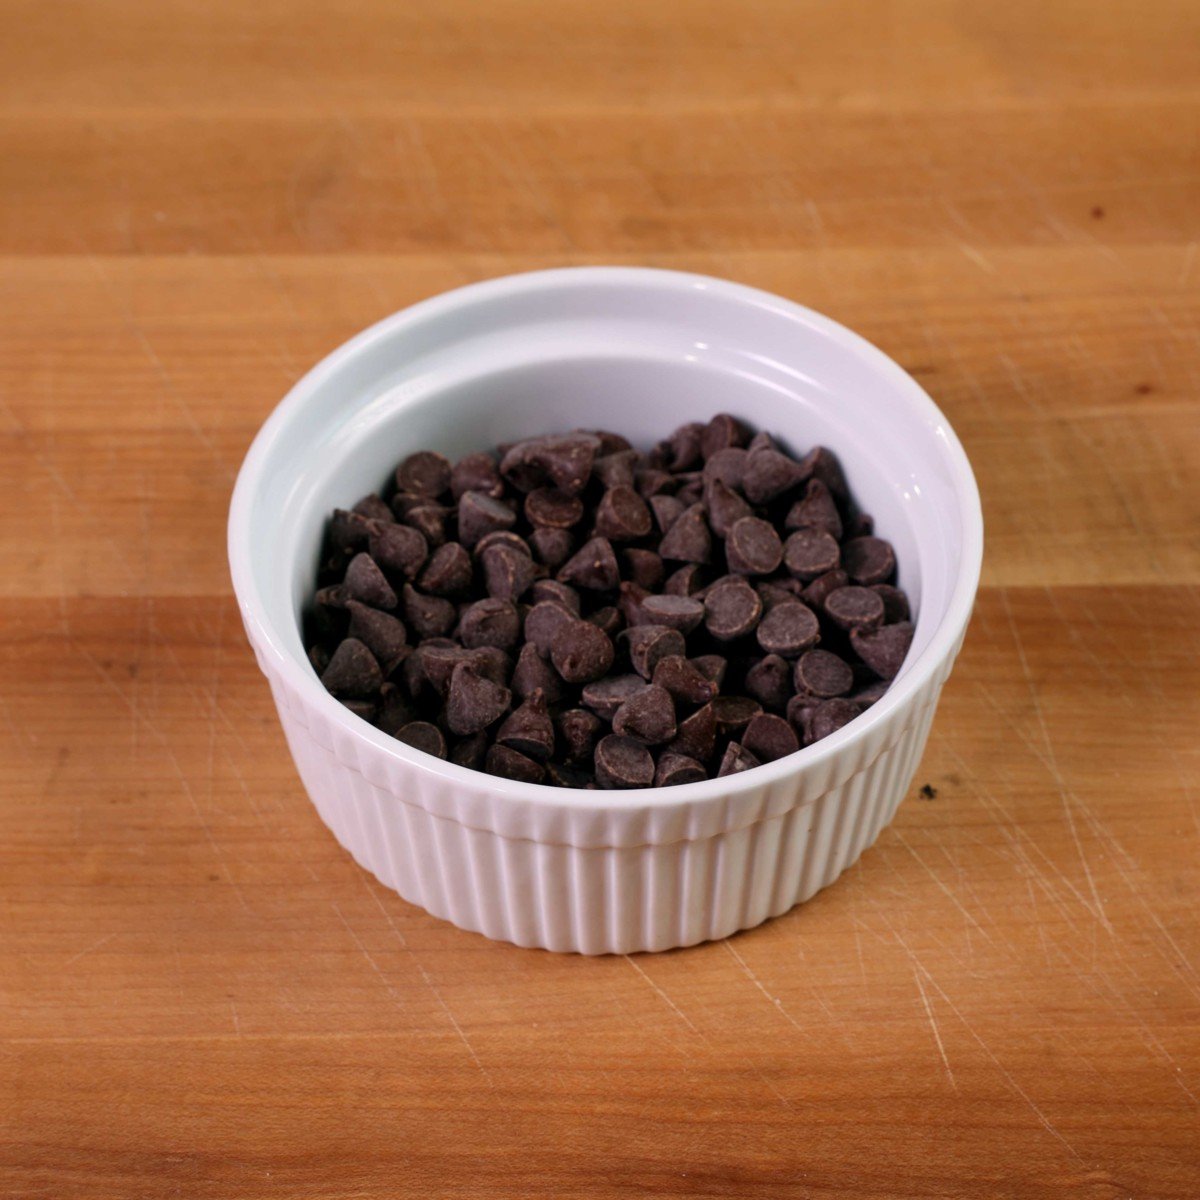 chocolate chips in a white ramekin on a brown table.